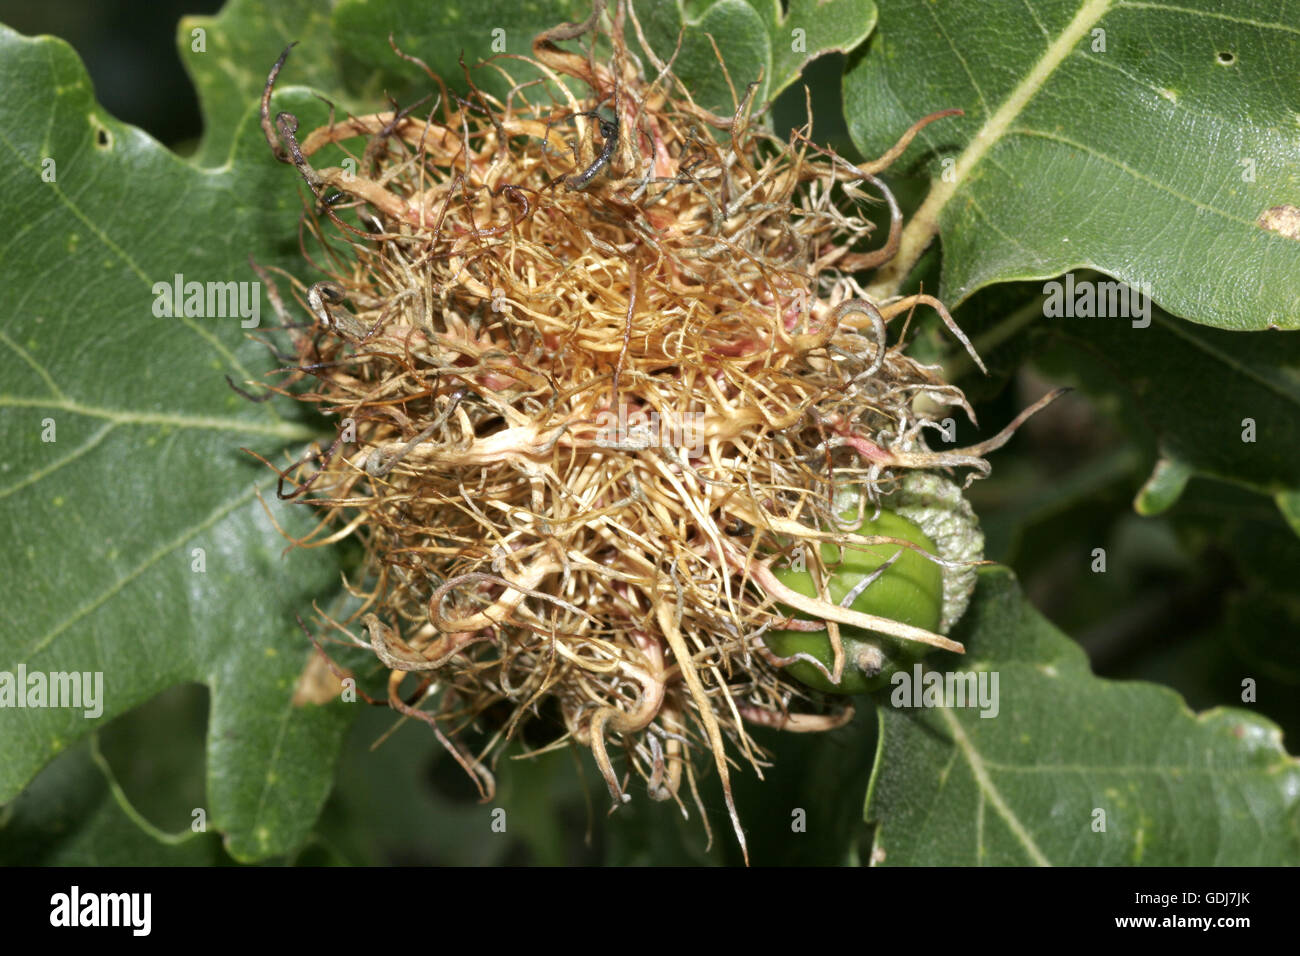 zoology / animals, insects, wasps, development, larva, gall of oak wasp (Cynips quercusfolii), at oak branch, Leitha Mountains, distribution: Europe, Additional-Rights-Clearance-Info-Not-Available Stock Photo